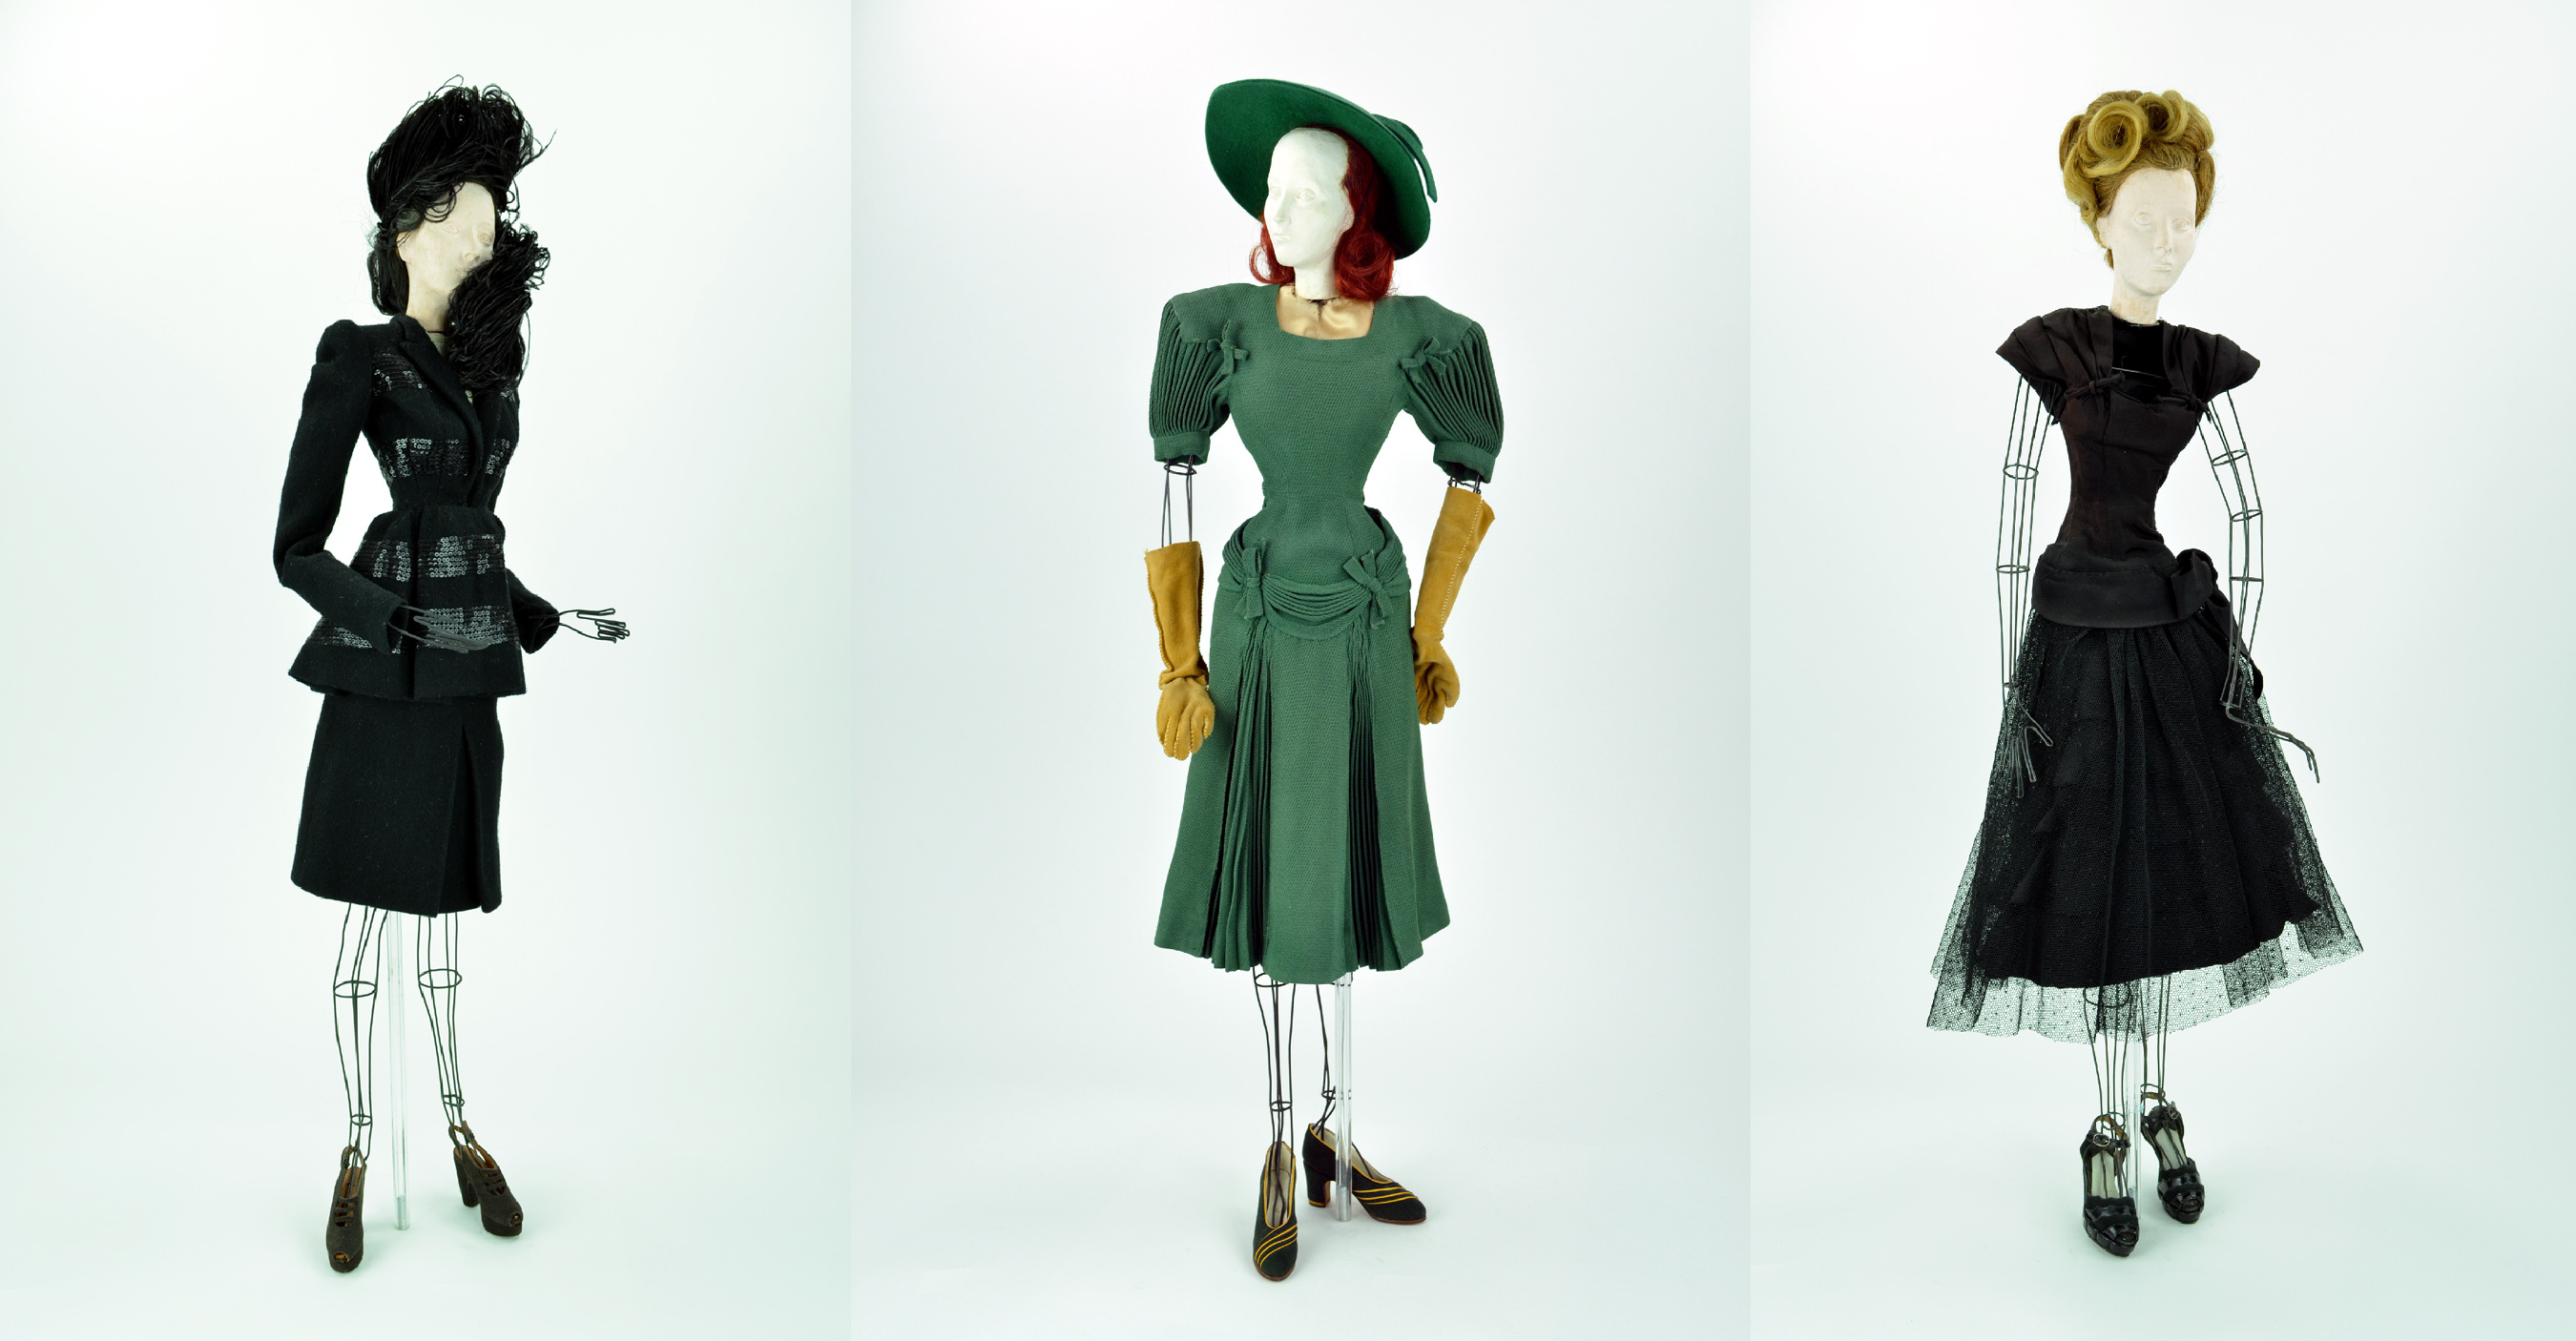 Fashions of the Middle Classes, as Portrayed by Paper Dolls